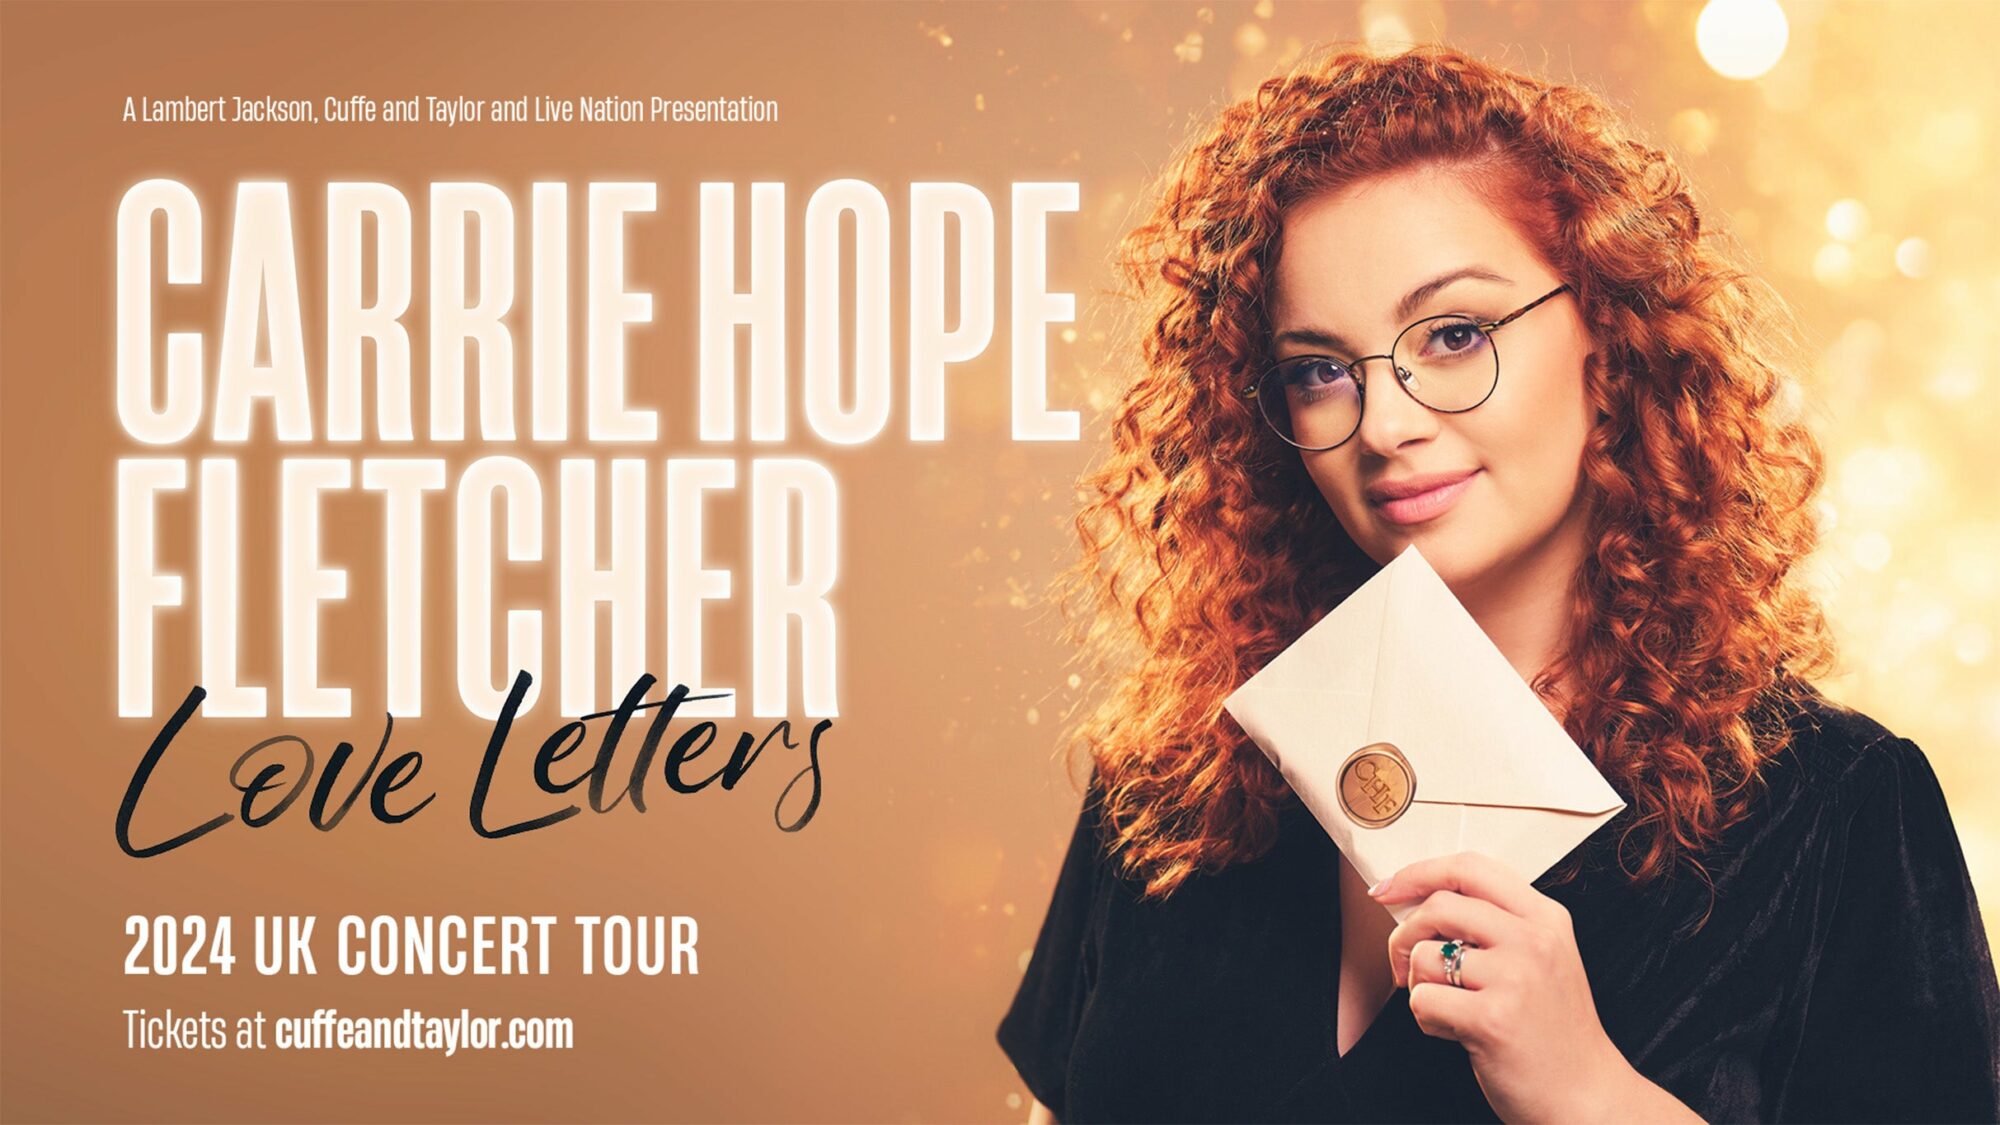 Image name Carrie Hope Fletcher Love Letters at York Barbican York the 23 image from the post Carrie Hope Fletcher - Love Letters at York Barbican, York in Yorkshire.com.